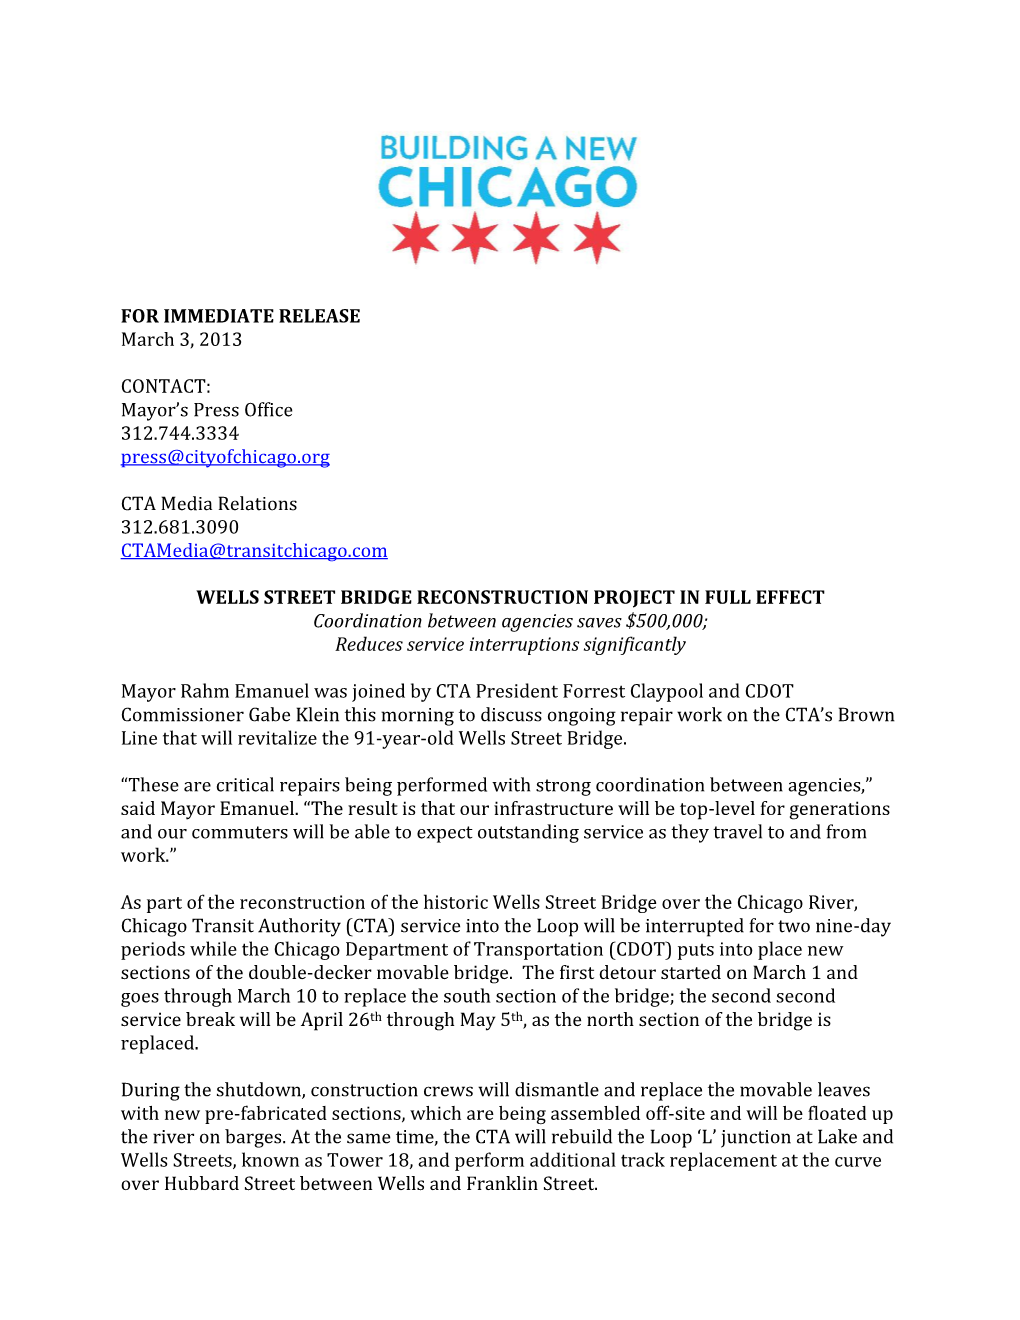 FOR IMMEDIATE RELEASE March 3, 2013 CONTACT: Mayor's Press Office 312.744.3334 Press@Cityofchicago.Org CTA Media Relations